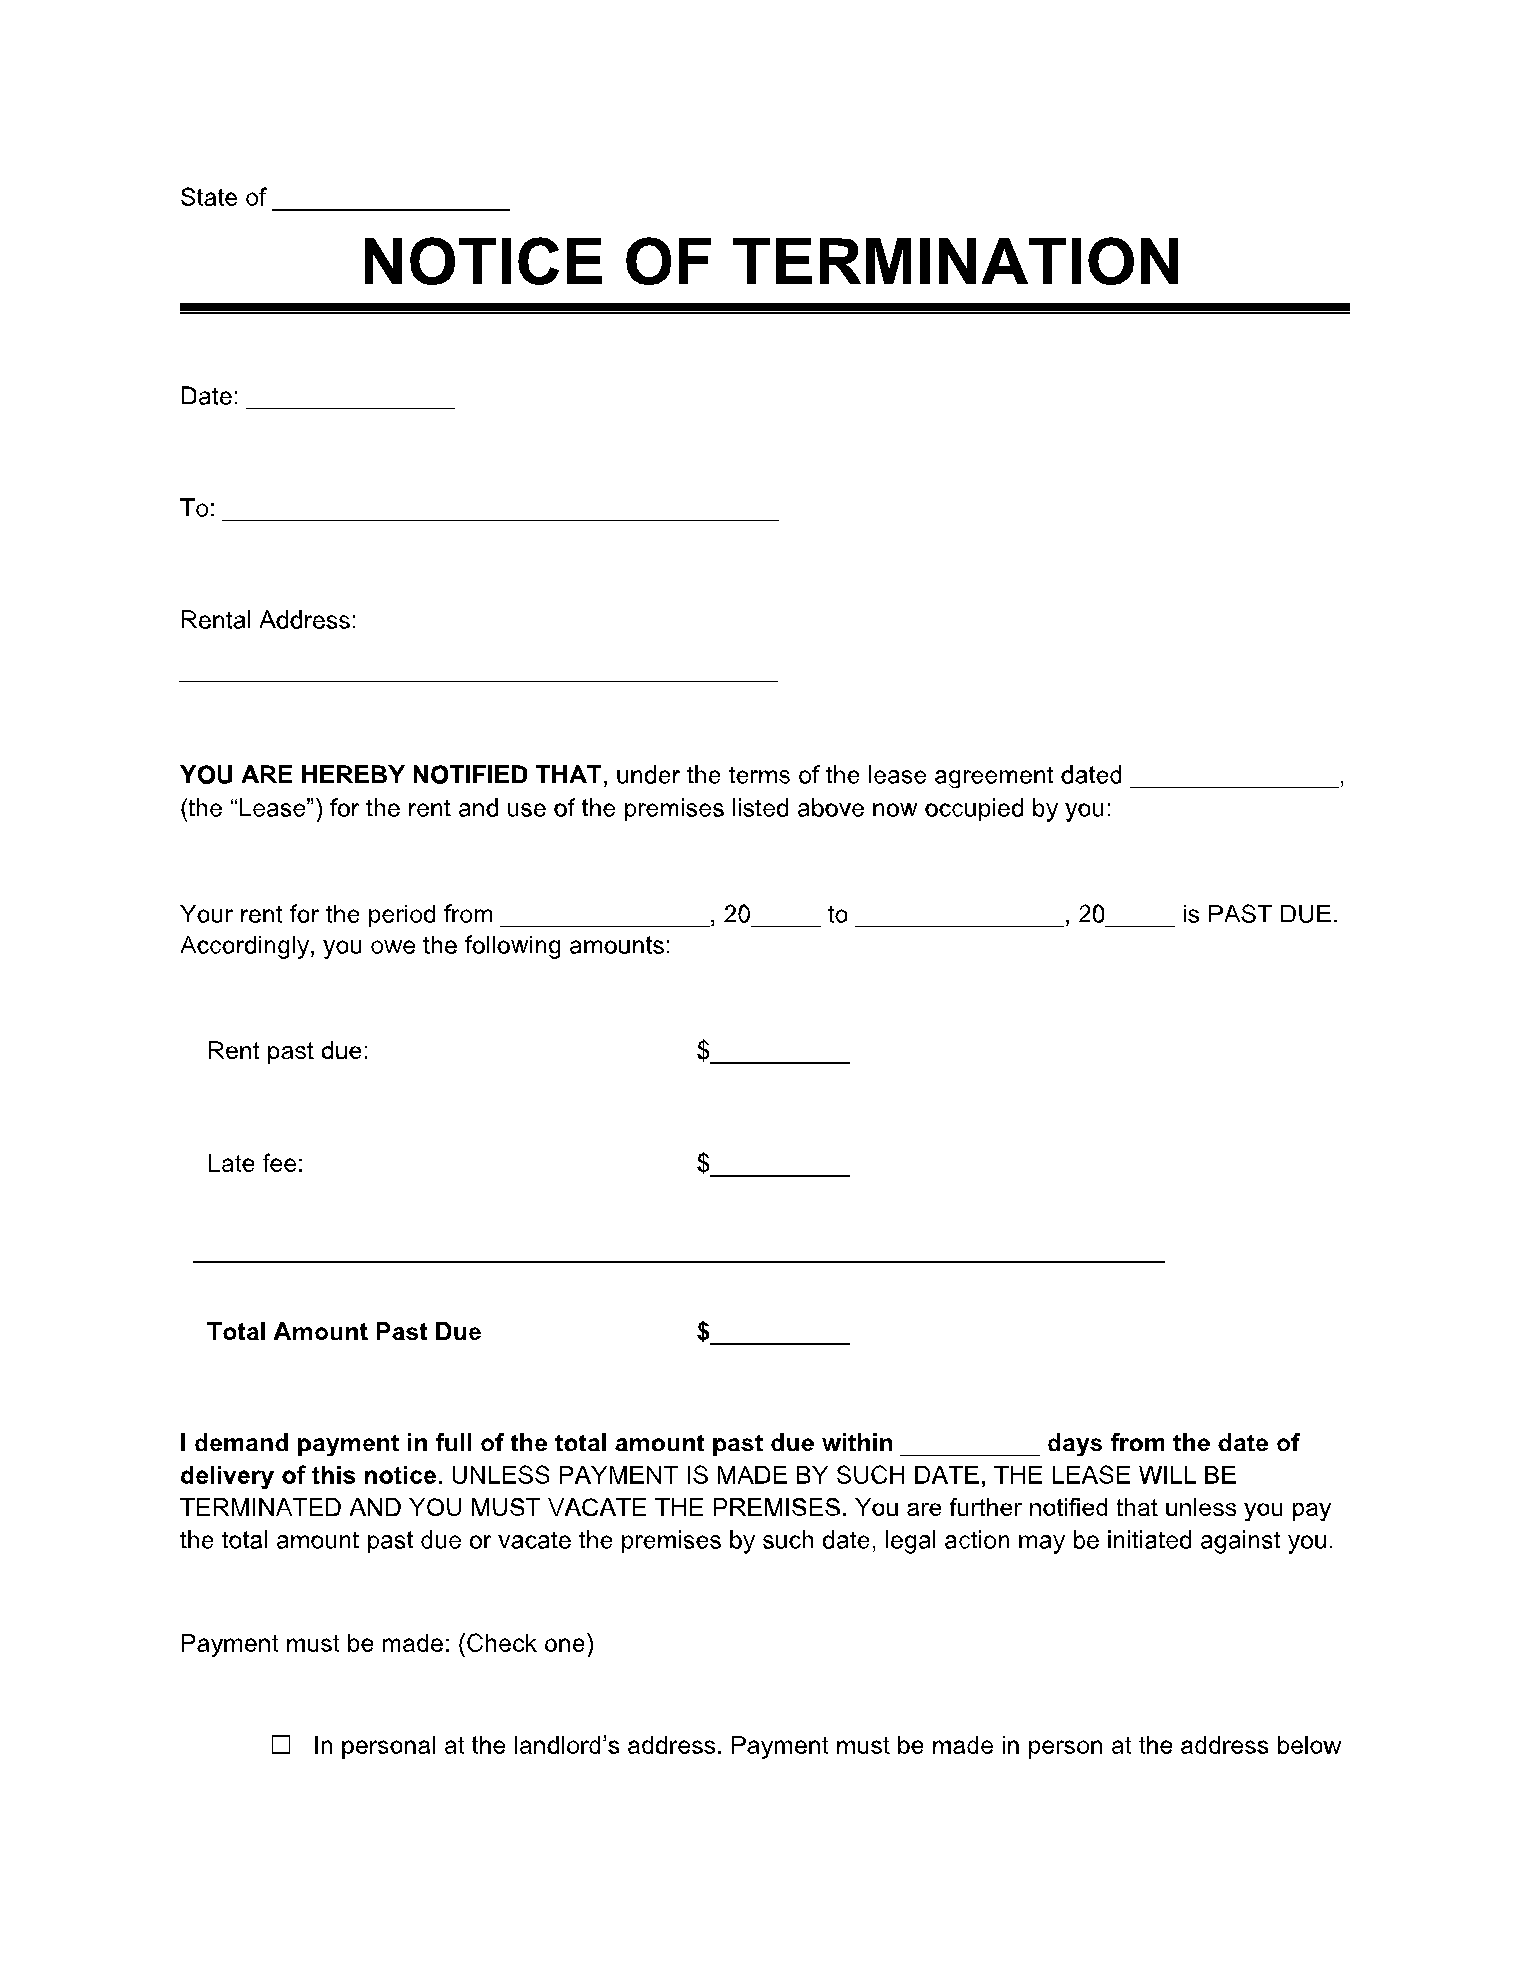 Illinois Eviction Notice Forms